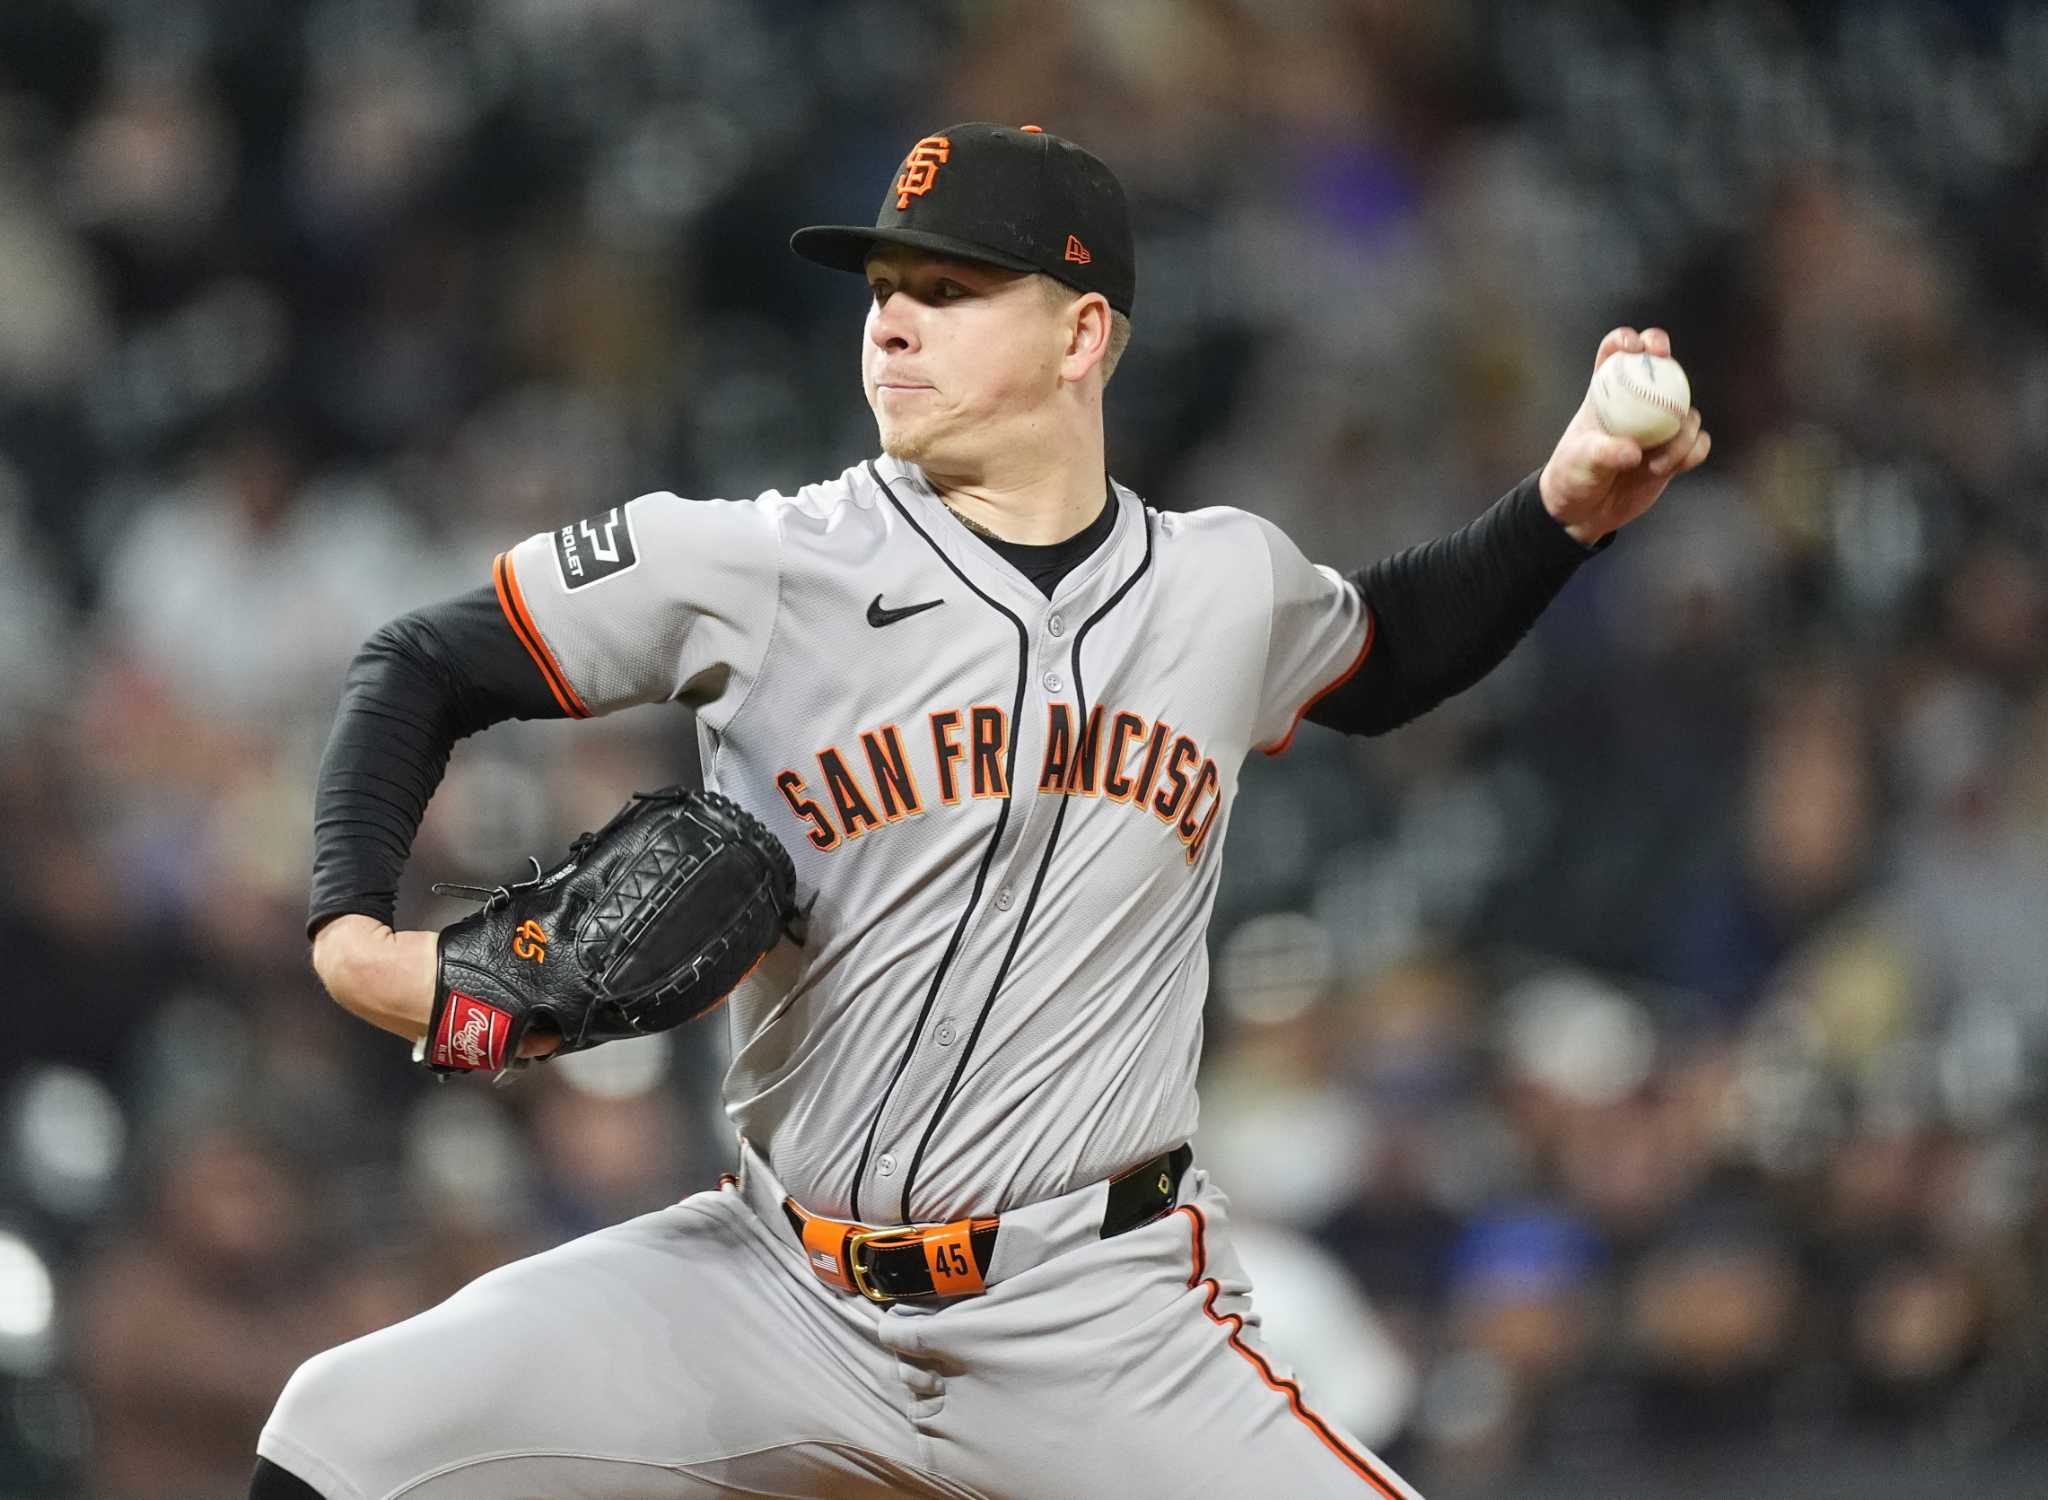 Harrison pitches 7 scoreless, San Francisco breaks 4-game skid with a 5-0 victory over Colorado